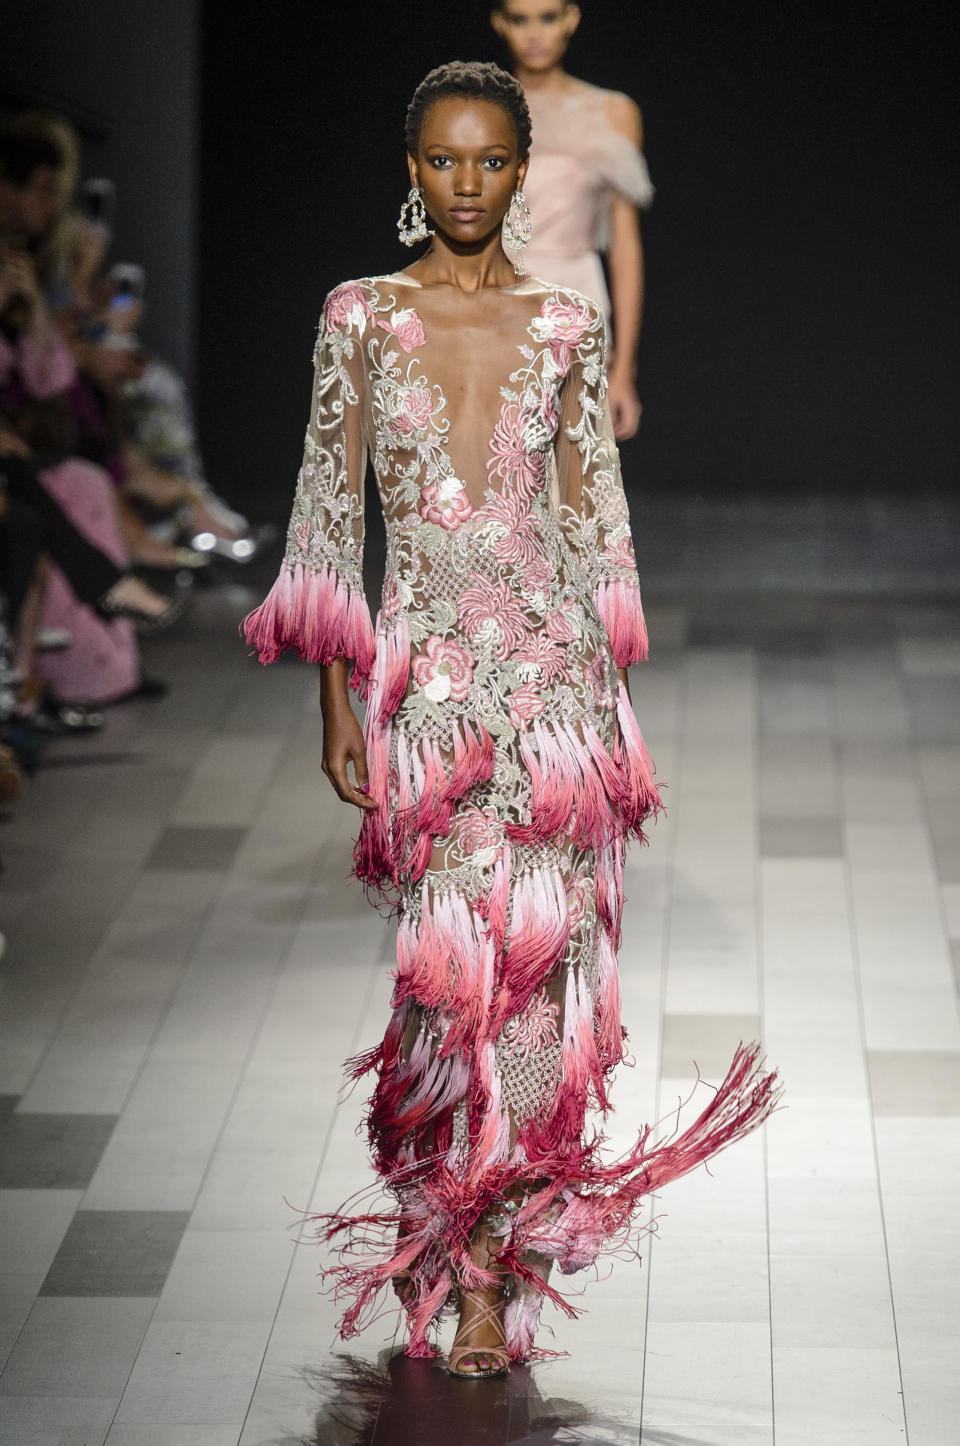 <p><i>Model wears rose-embellished and fringed dress from the SS18 Marchesa collection. (Photo: ImaxTree) </i></p>